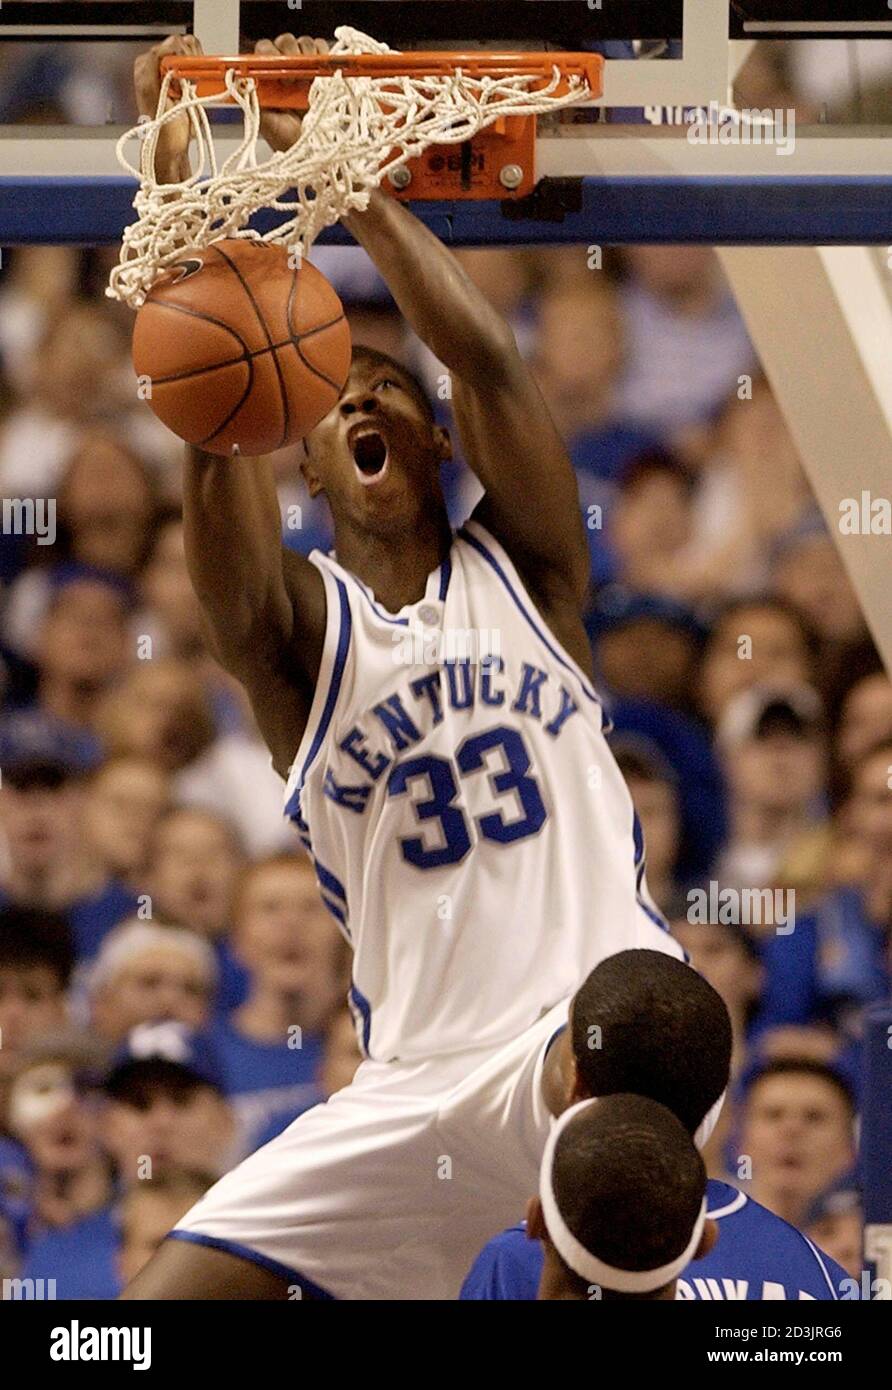 University of Kentucky's Antwain Barbour dunks against the University of  Florida defense during the second half of play at Rupp Arena in Lexington,  Kentucky, March 7, 2004. Kentucky won the game, 82-62.